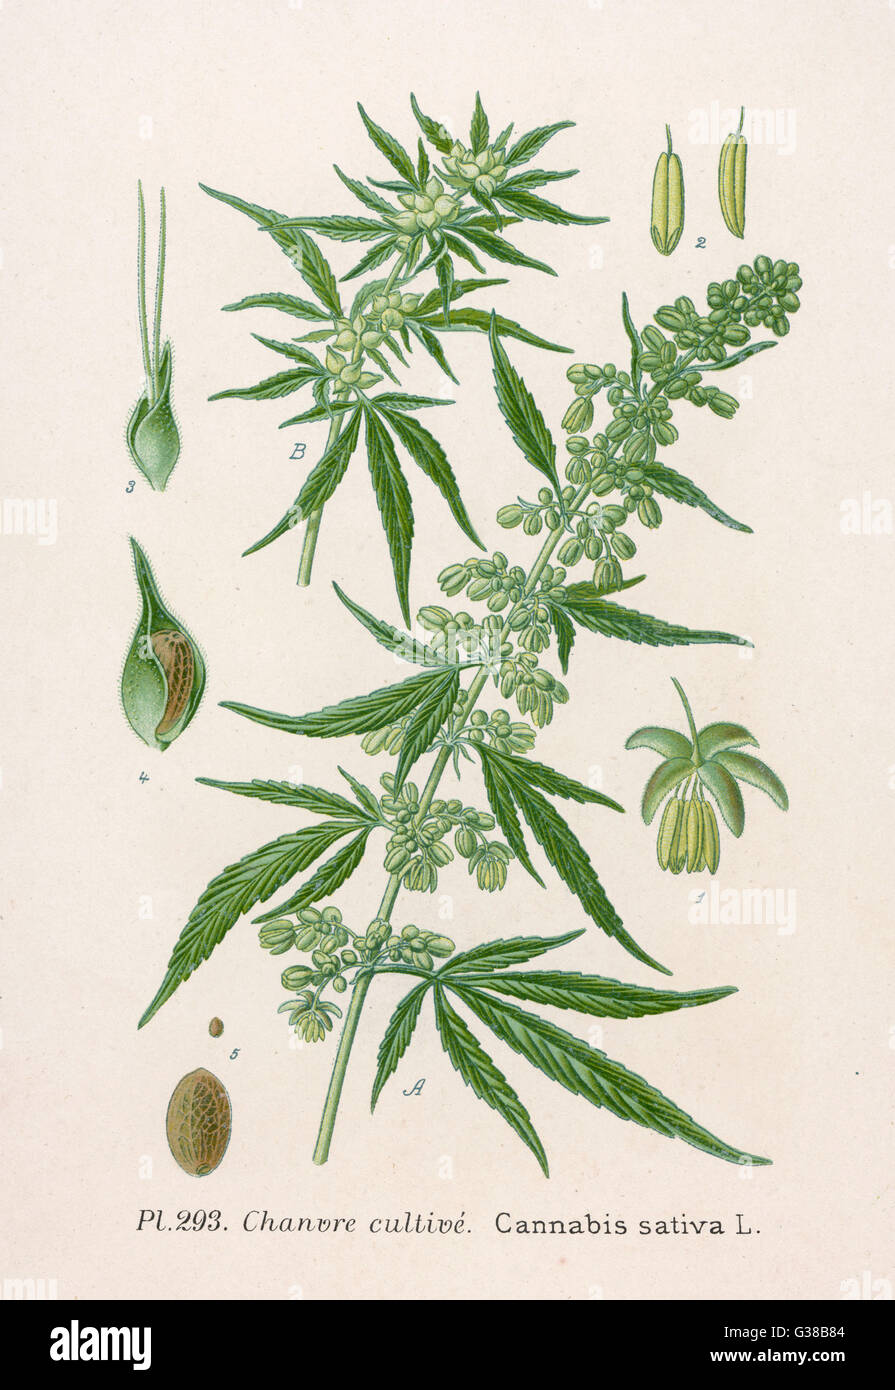 CANNABIS SATIVA also known by several other  names A medicinal plant which has  been prescribed for almost  every ailment     Date: late 19th century Stock Photo